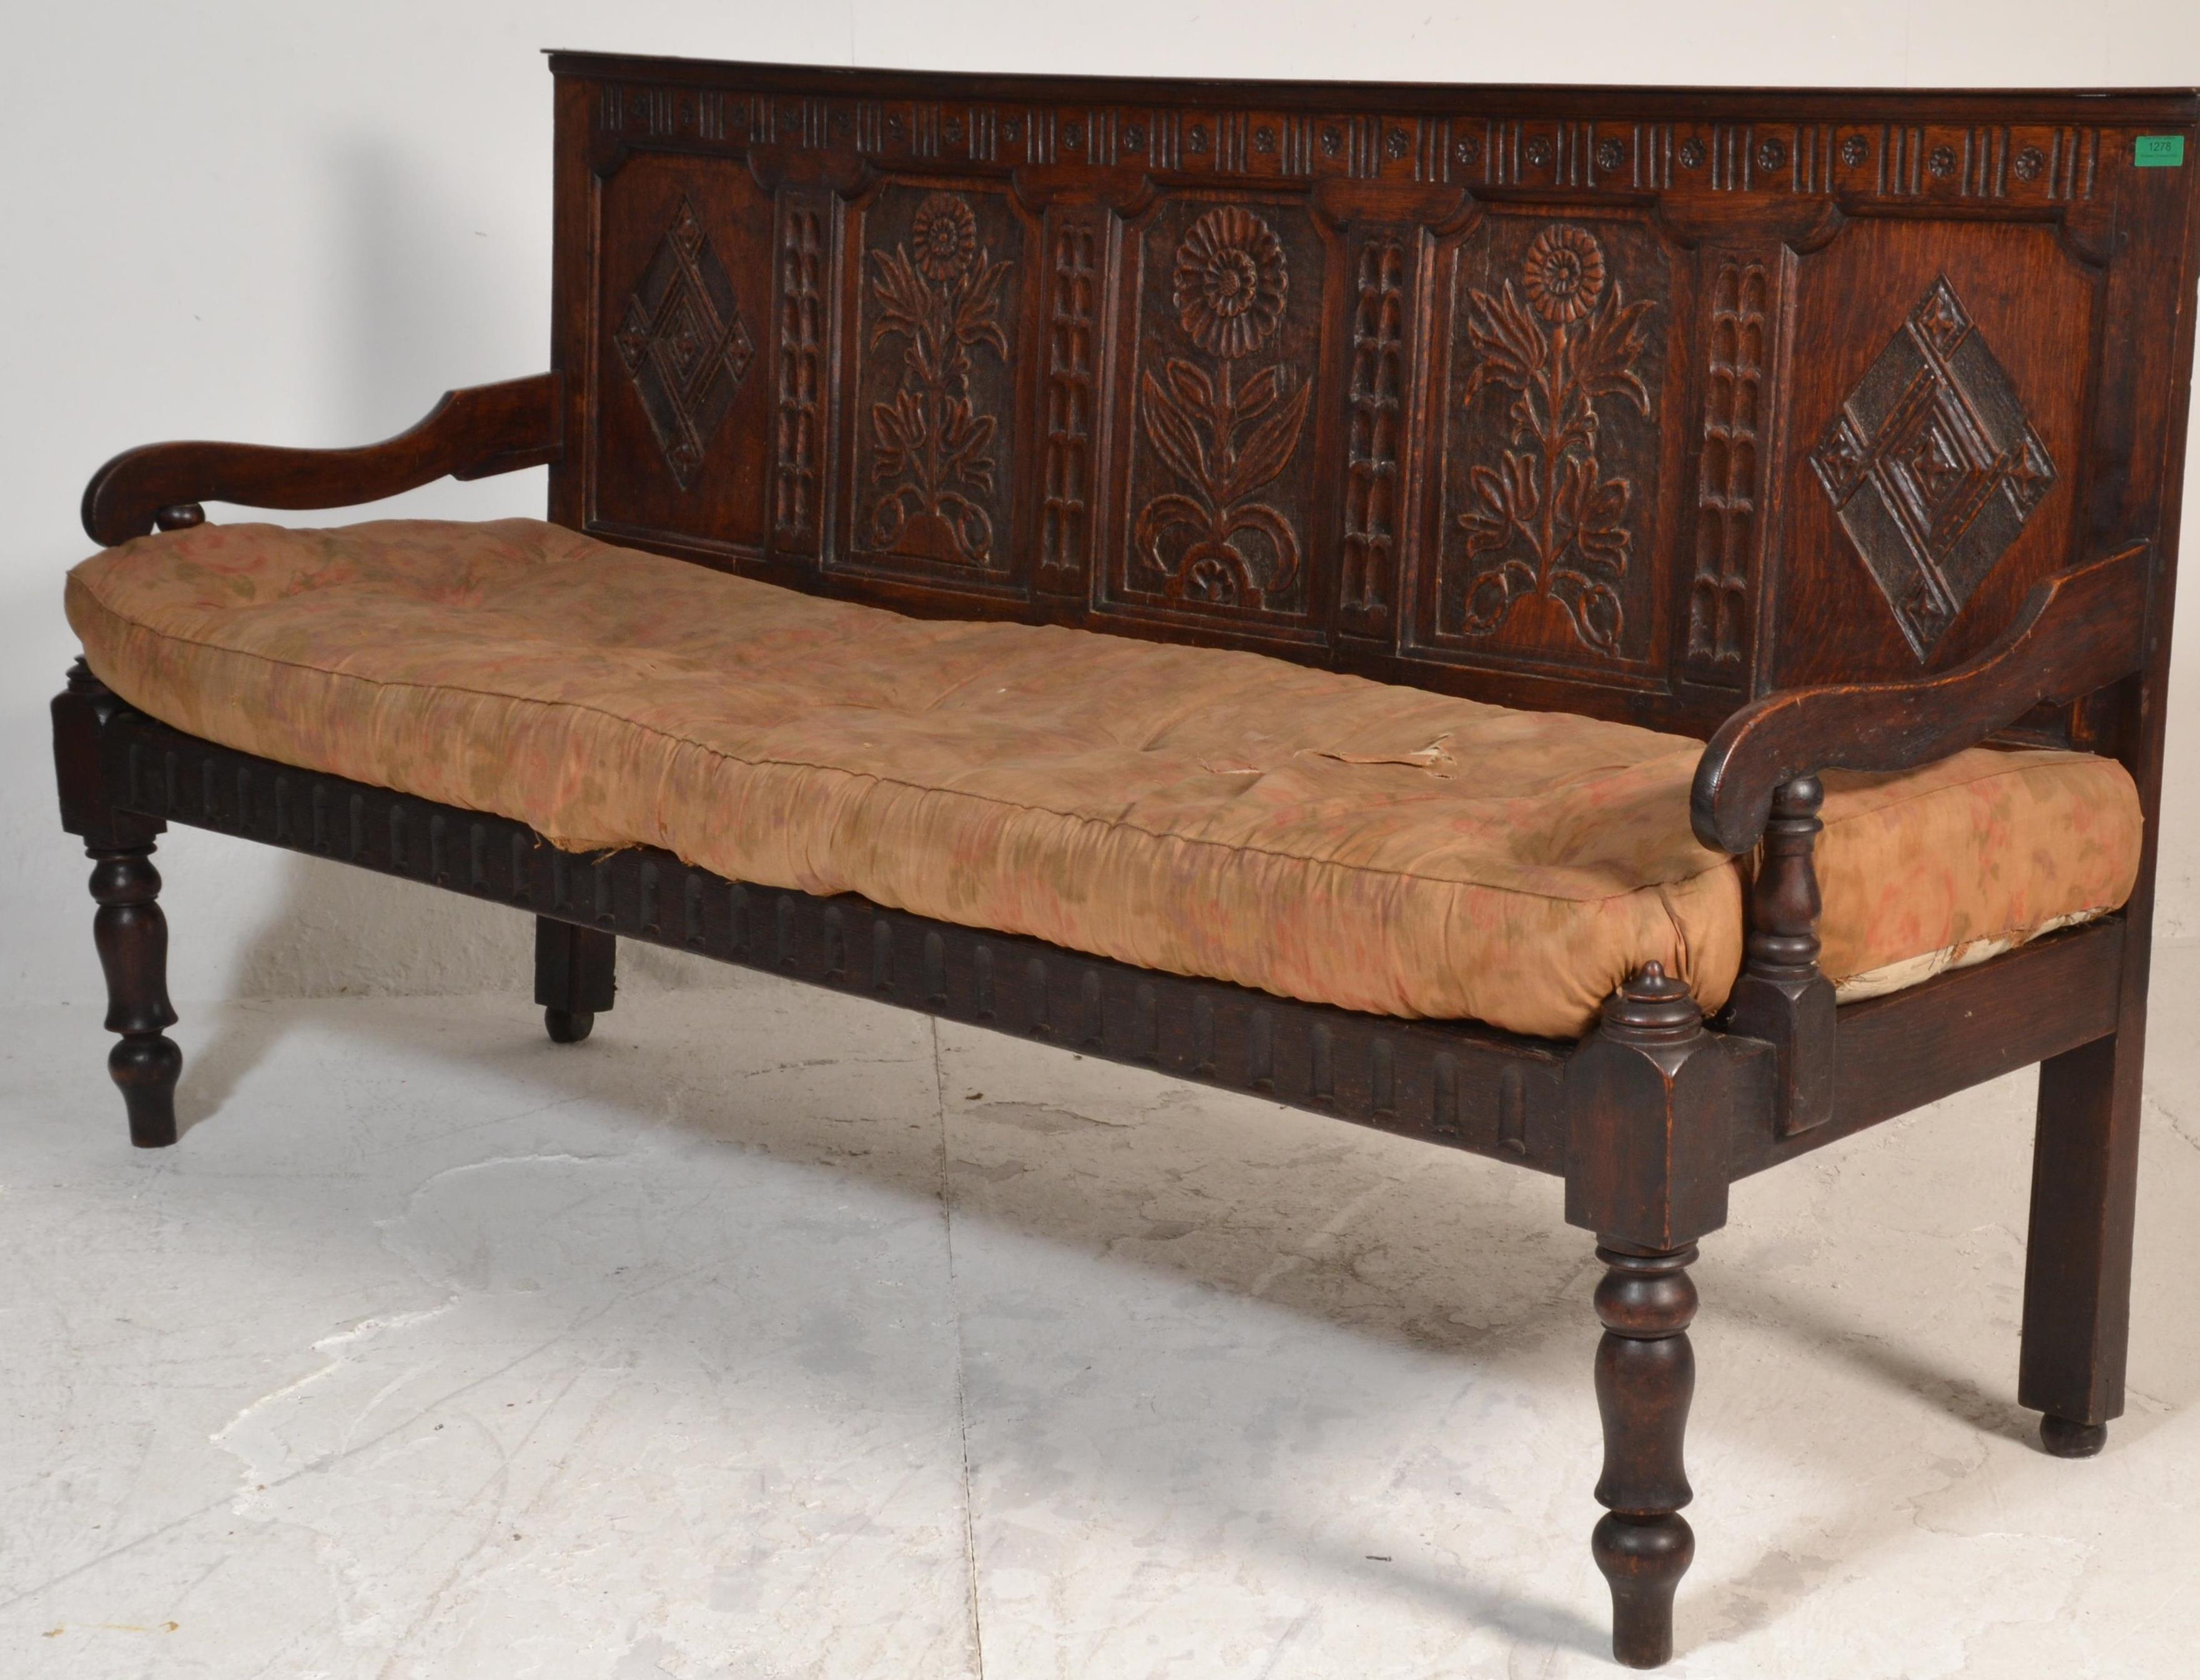 An 18th century large carved West country oak hall settle bench. Raised on turned legs with - Image 5 of 6